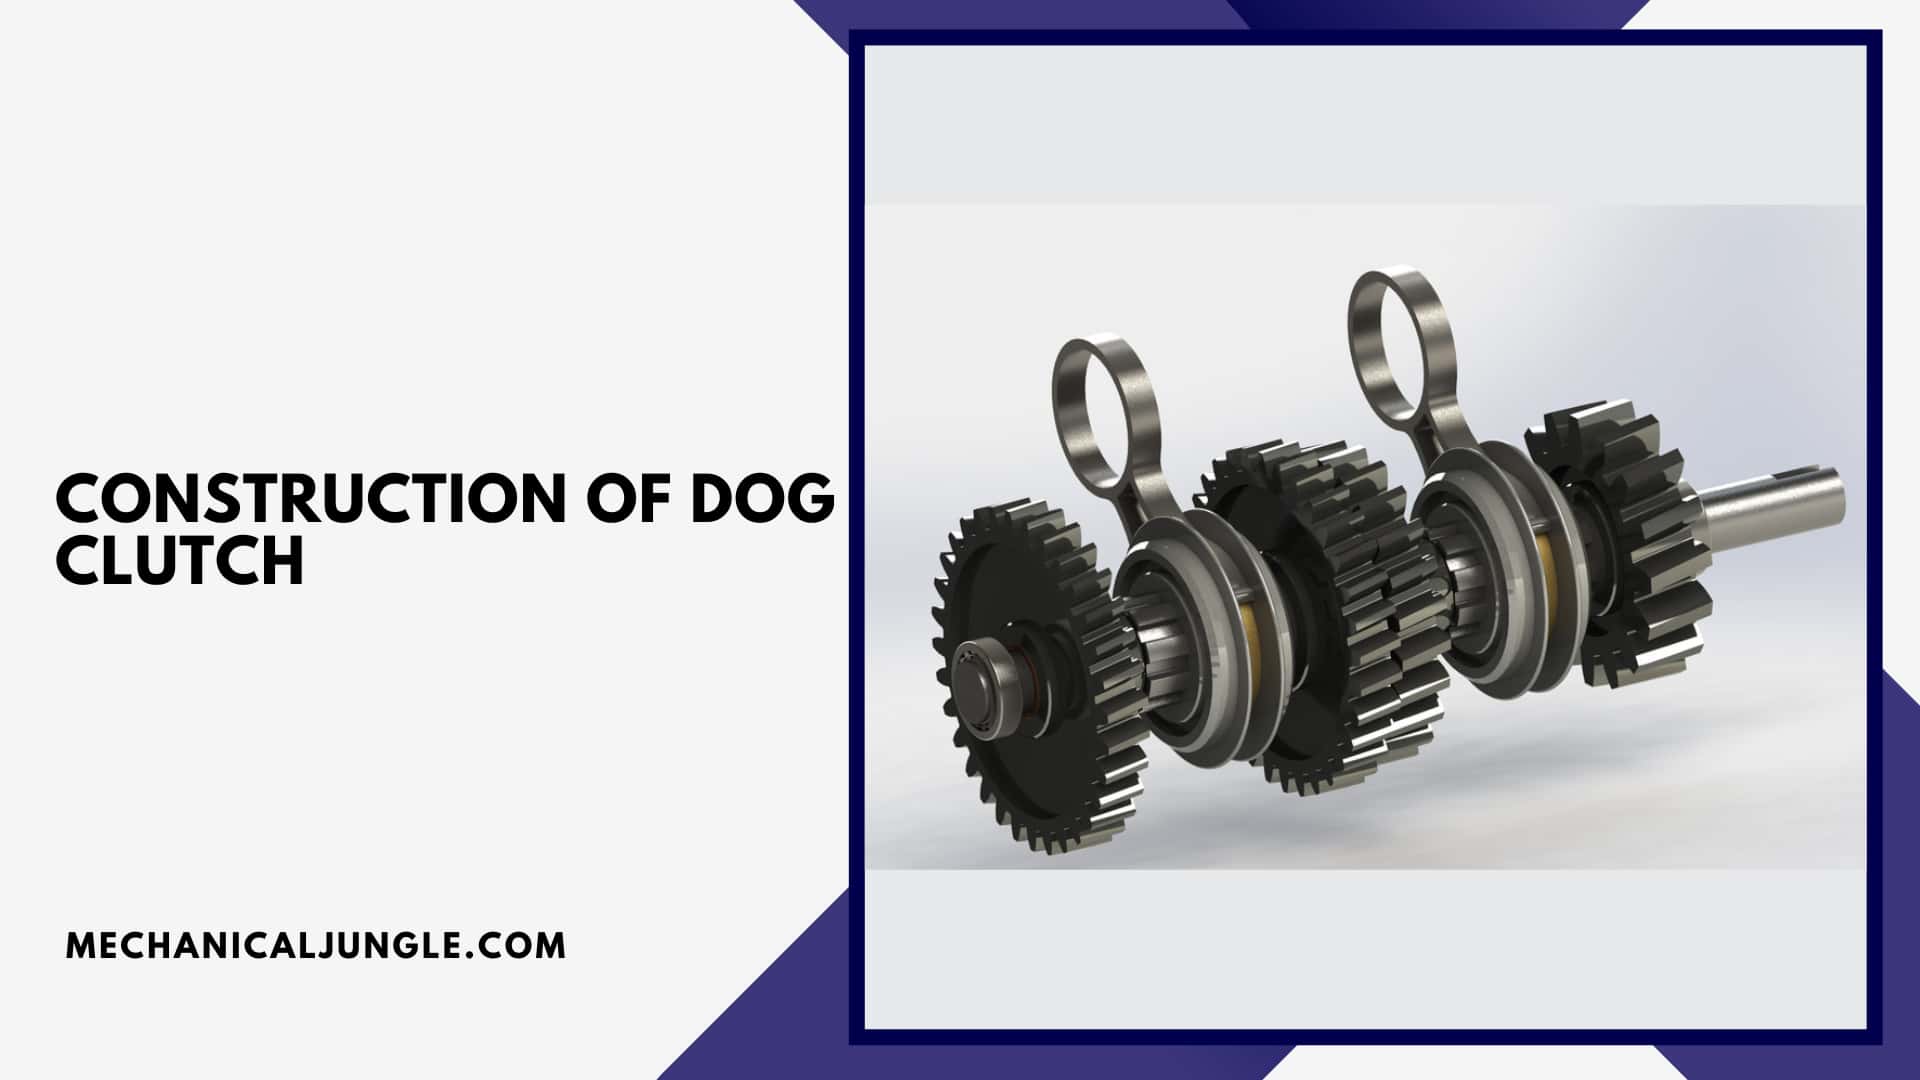 Construction of Dog Clutch